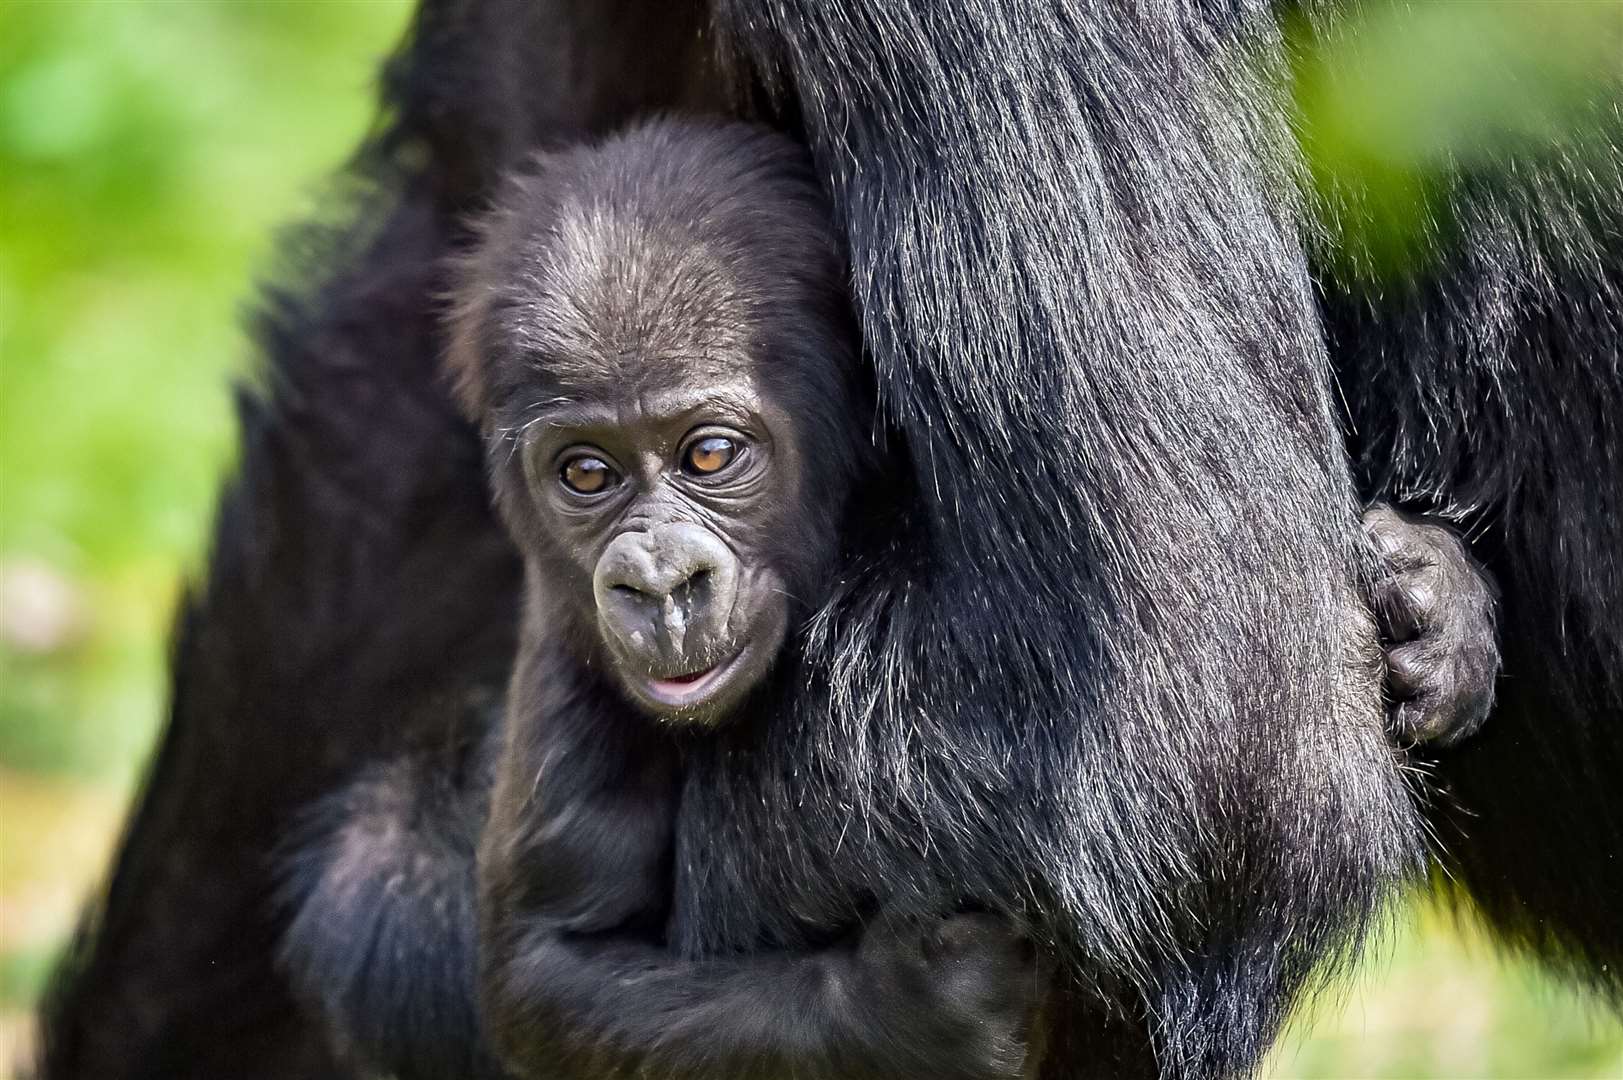 The baby gorilla will soon be learning how to walk and crawl (Ben Birchall/PA)